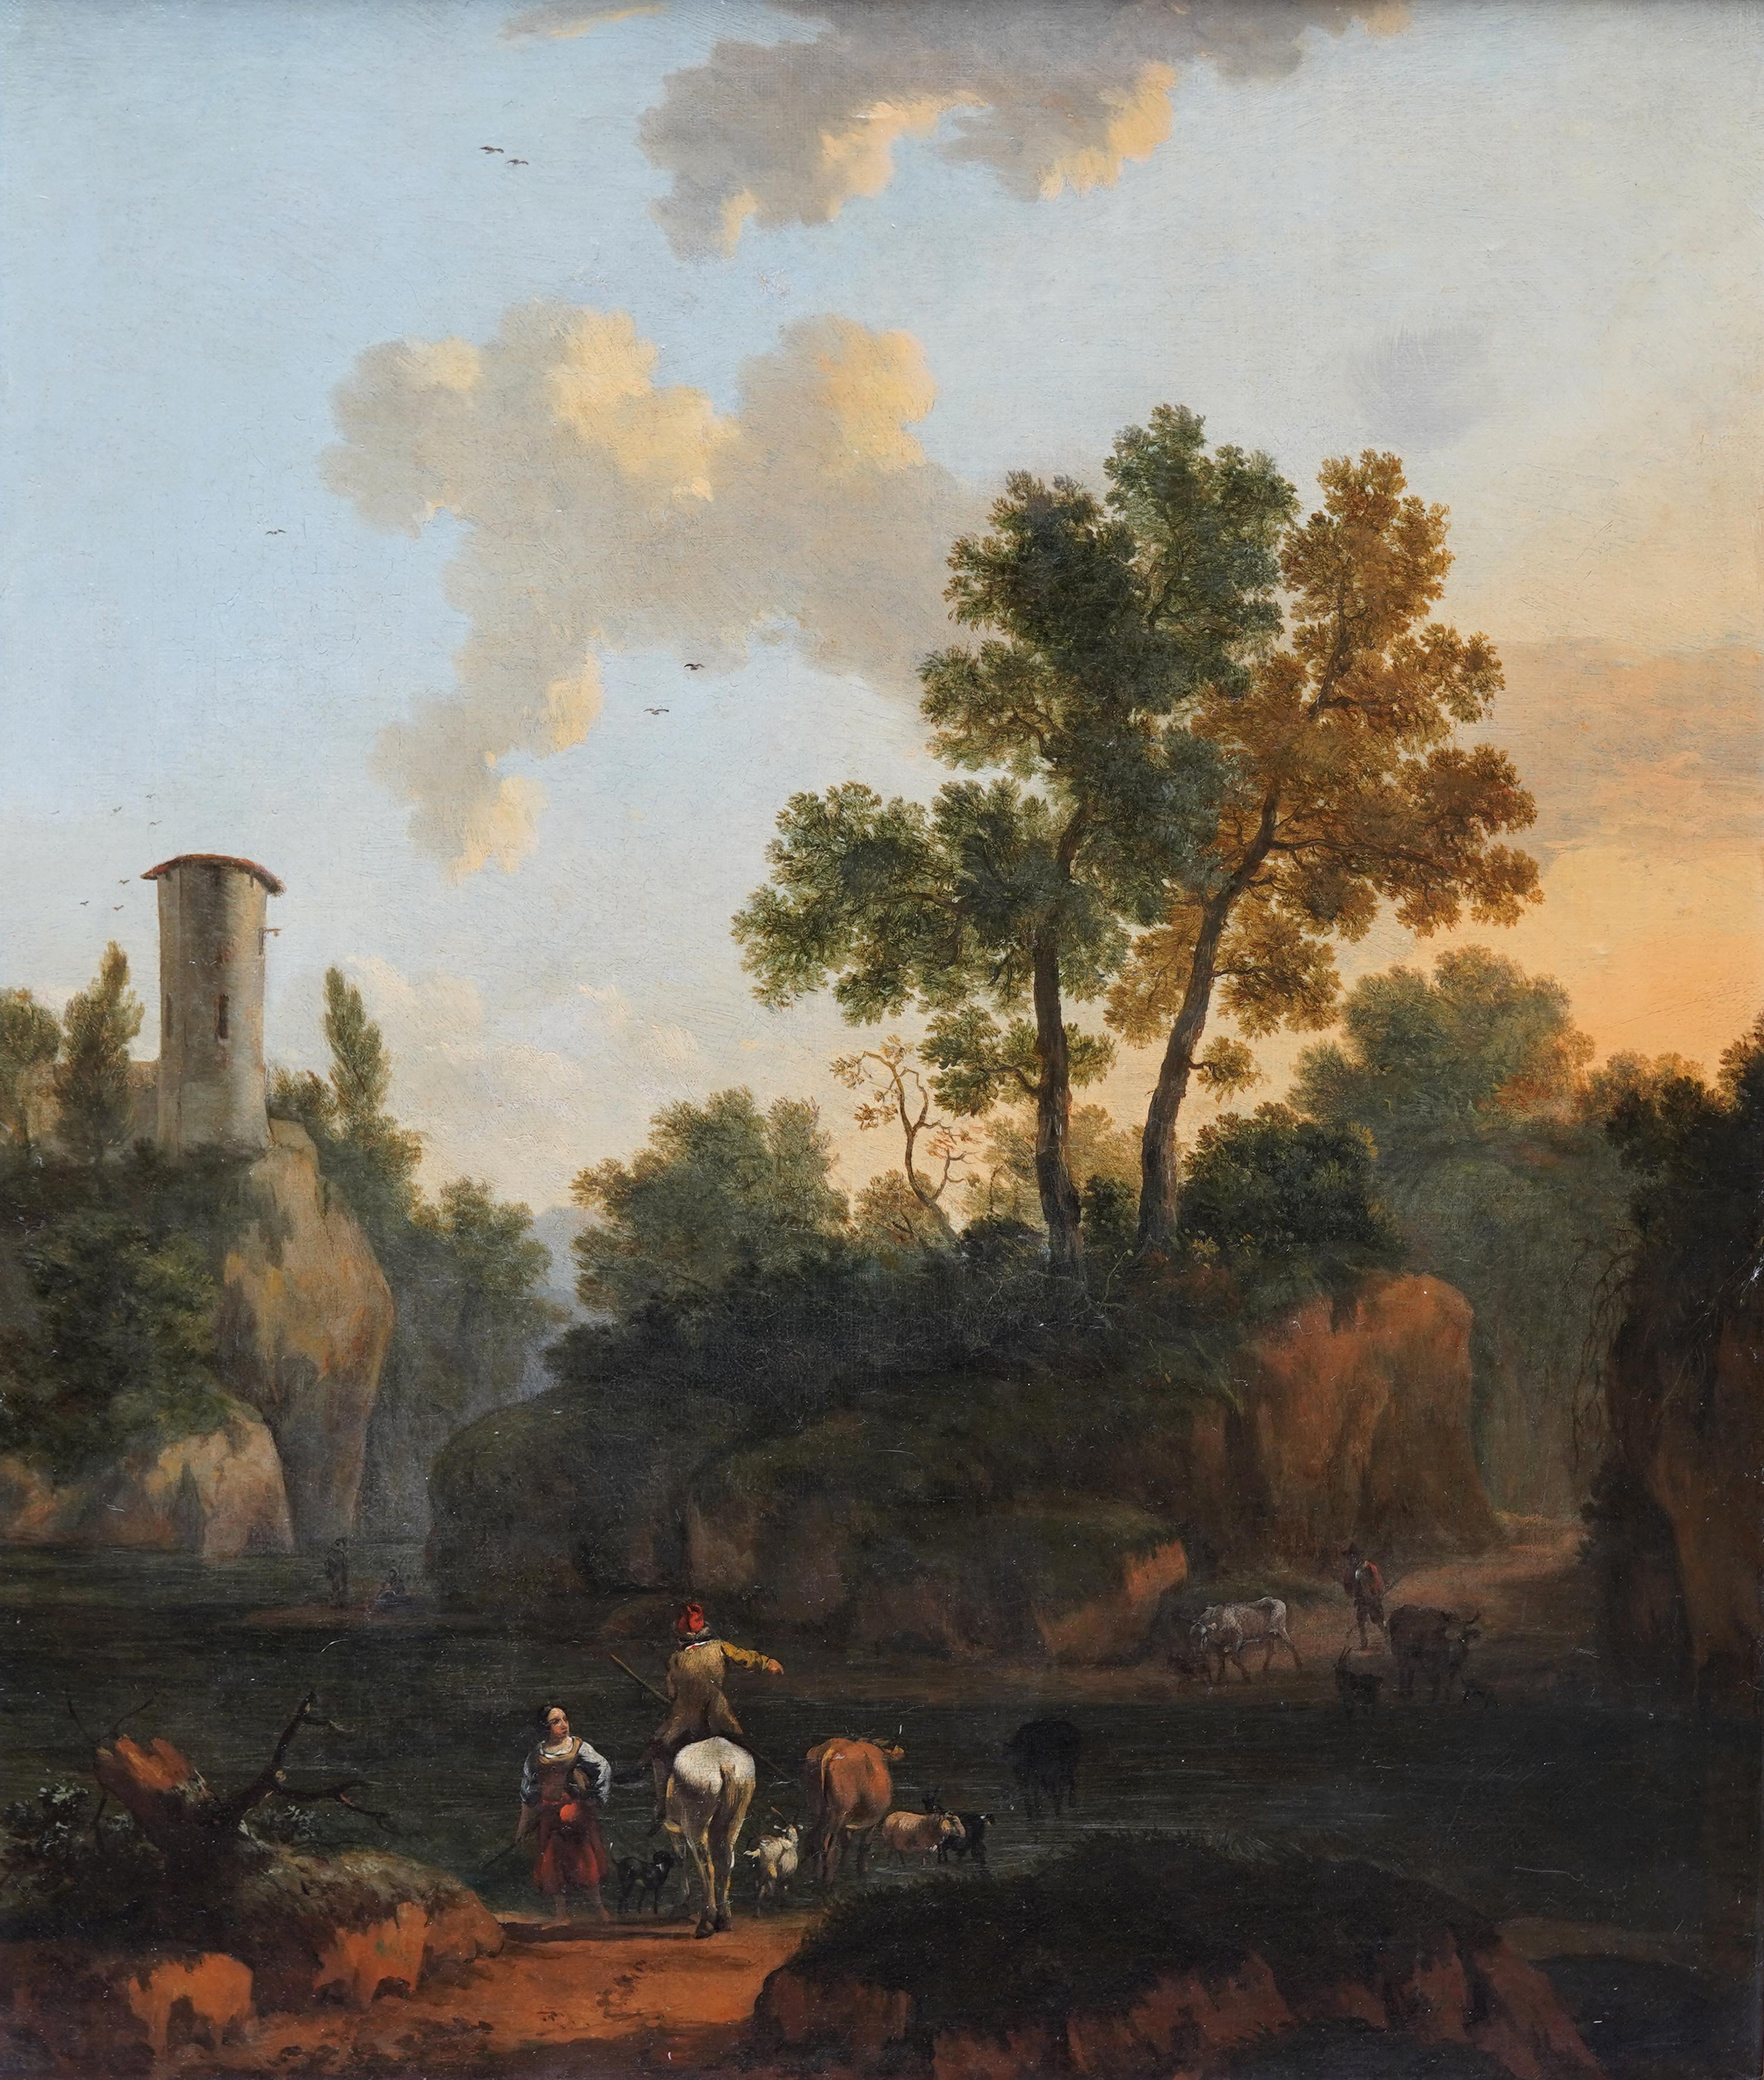 Wooded Figurative River Landscape - Dutch 17thC Golden Age art oil painting  - Painting by Abraham Jansz Begeyn